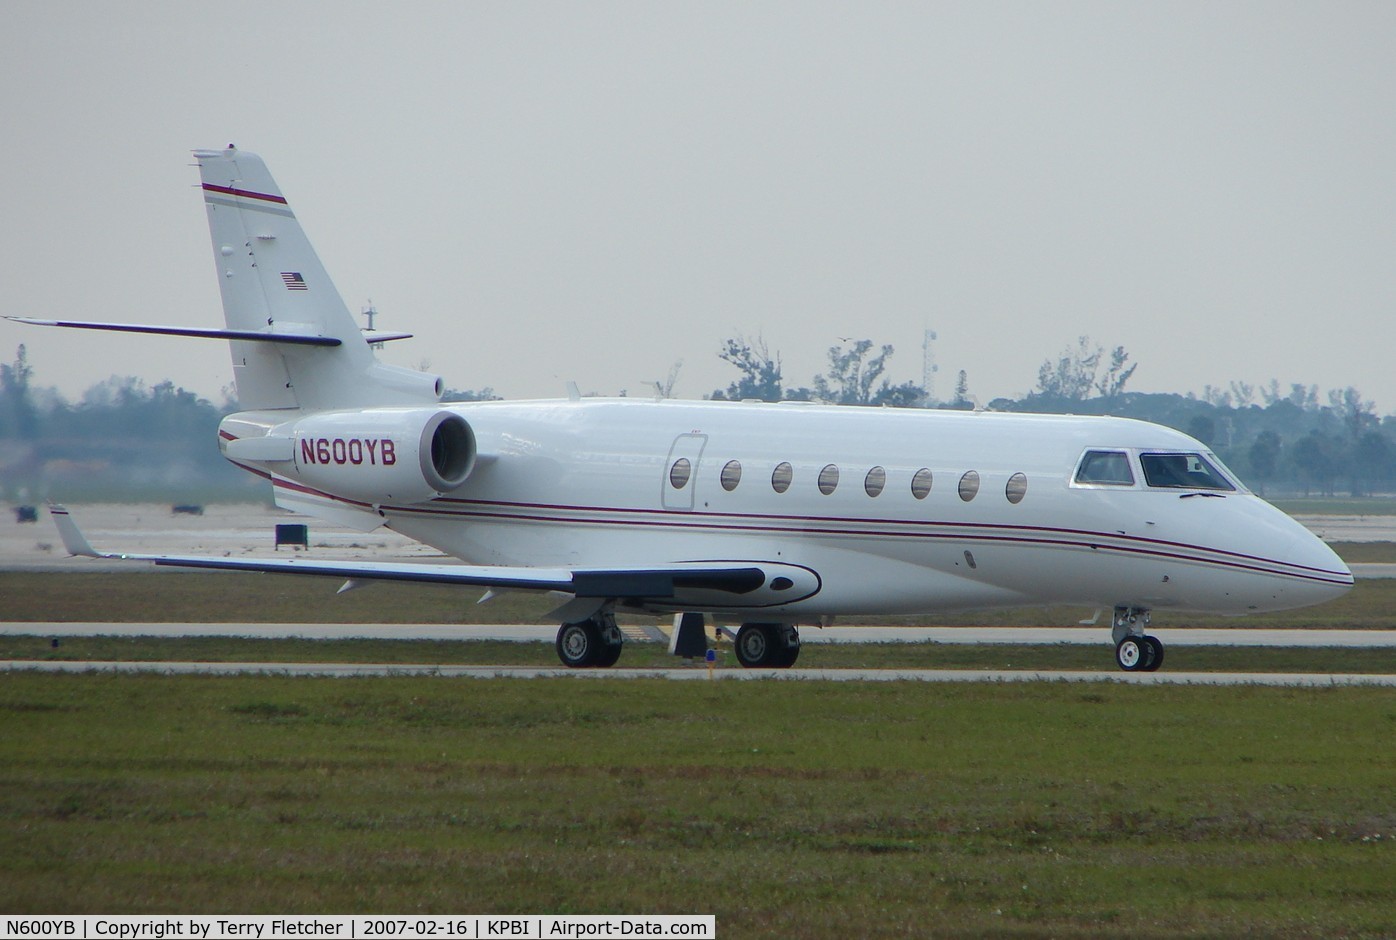 N600YB, 2004 Israel Aircraft Industries GULFSTREAM 200 C/N 096, part of the Friday afternoon arrivals 'rush' at PBI